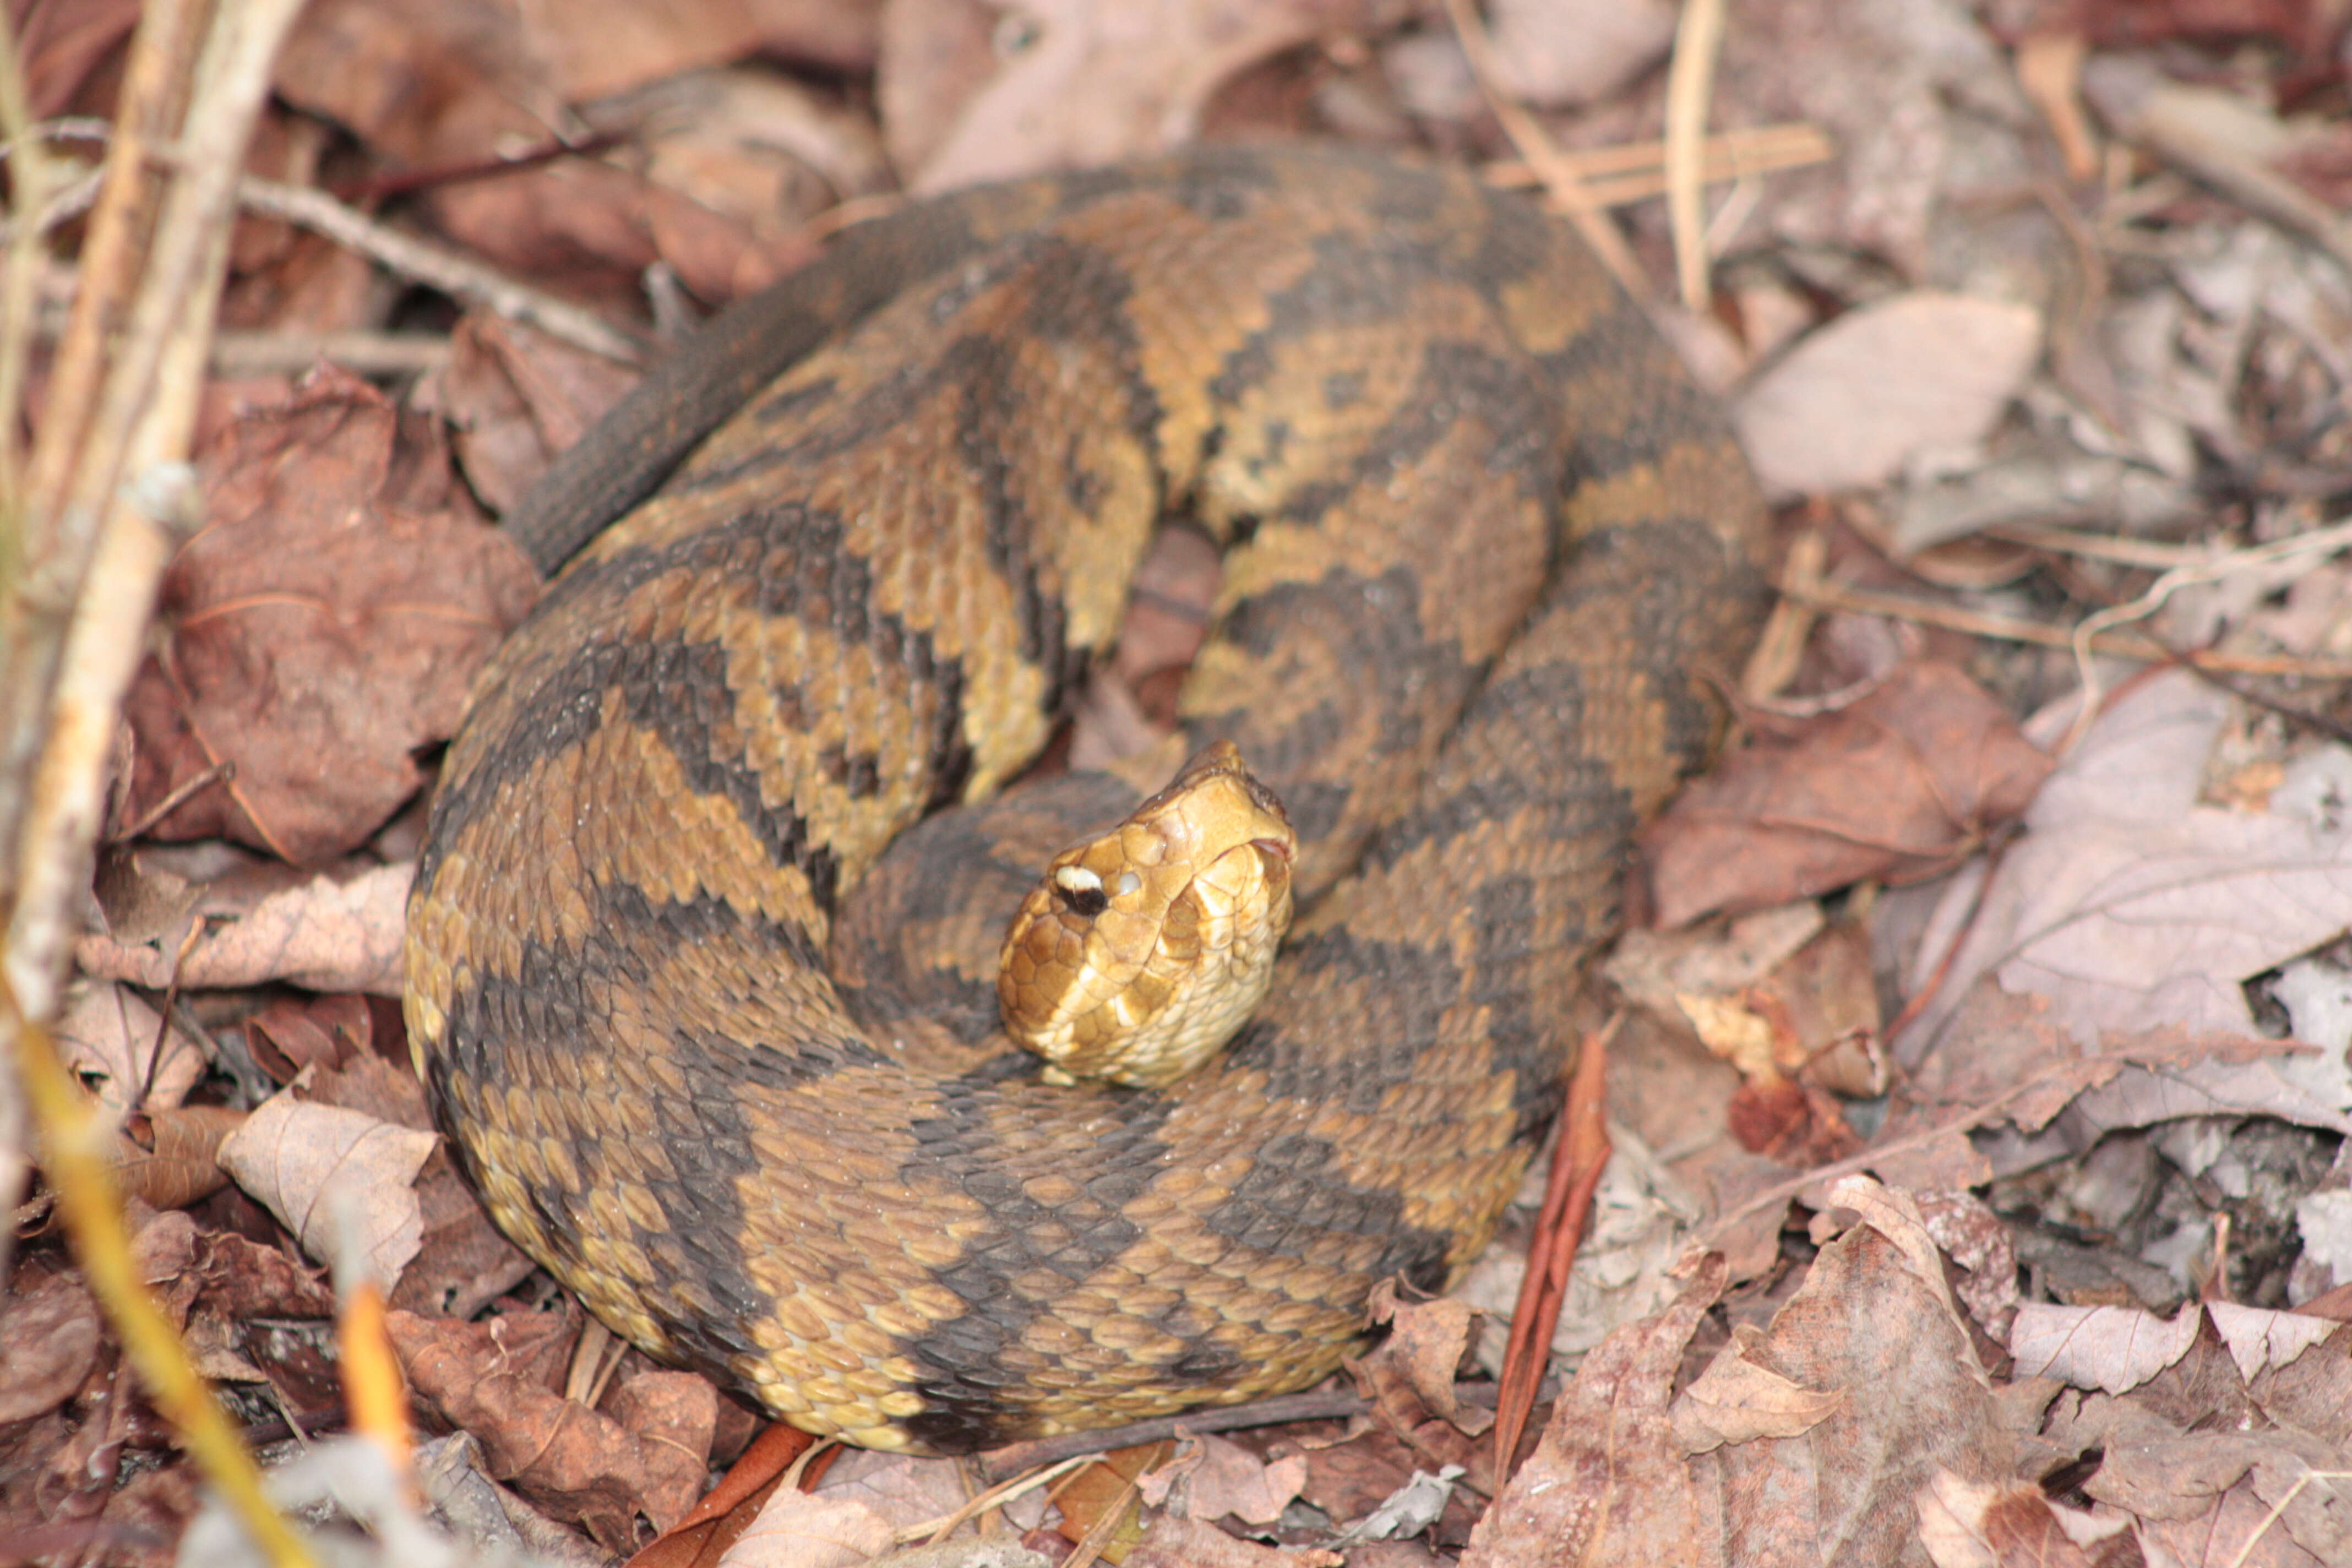 Image of Cottonmouth